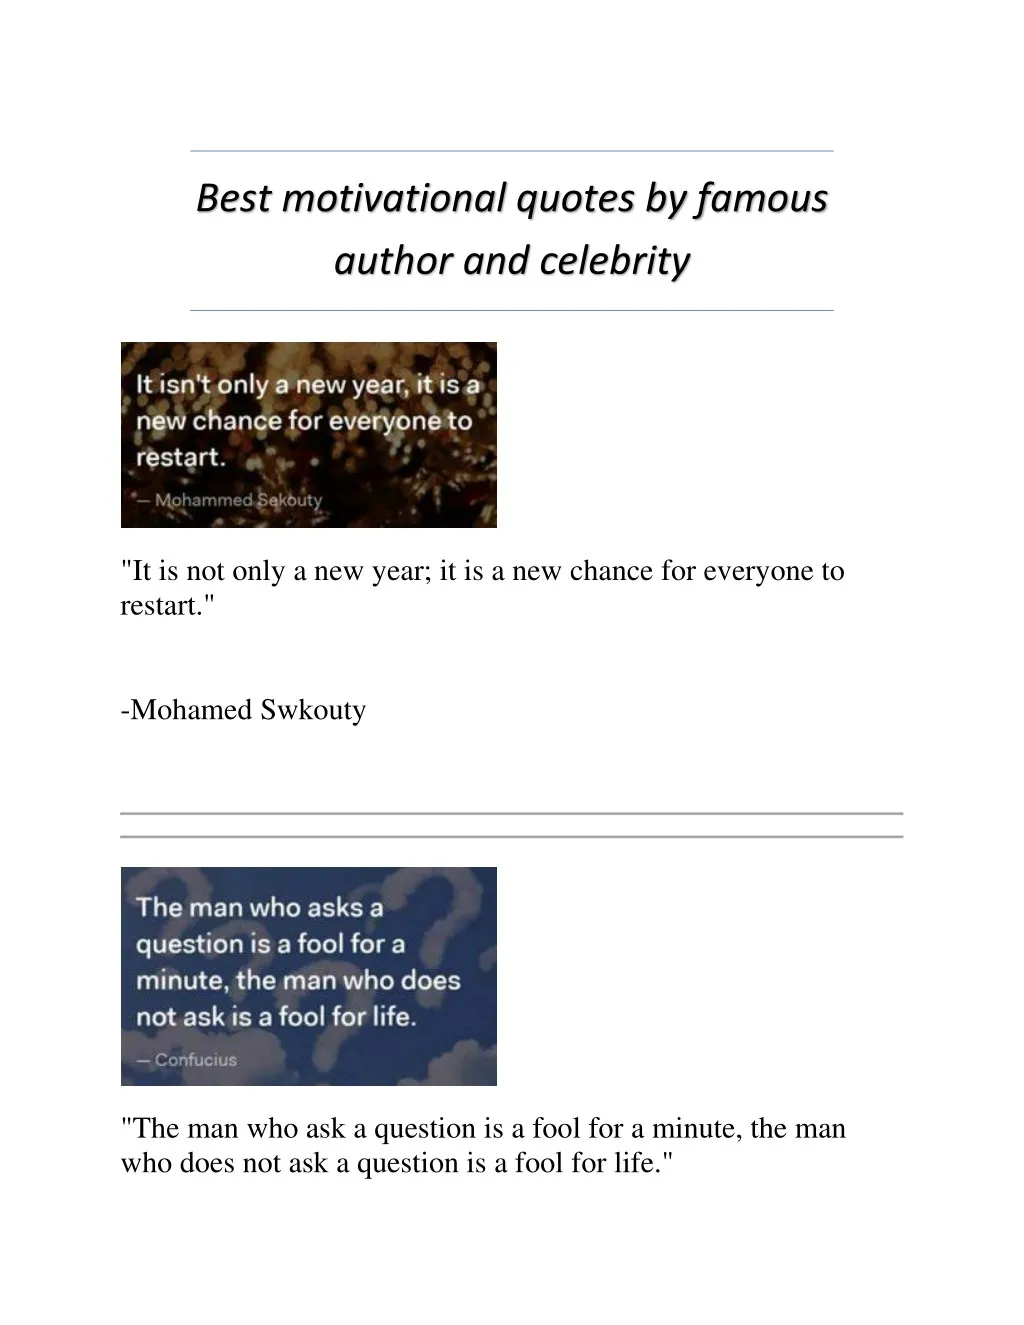 best motivational quotes by famous author